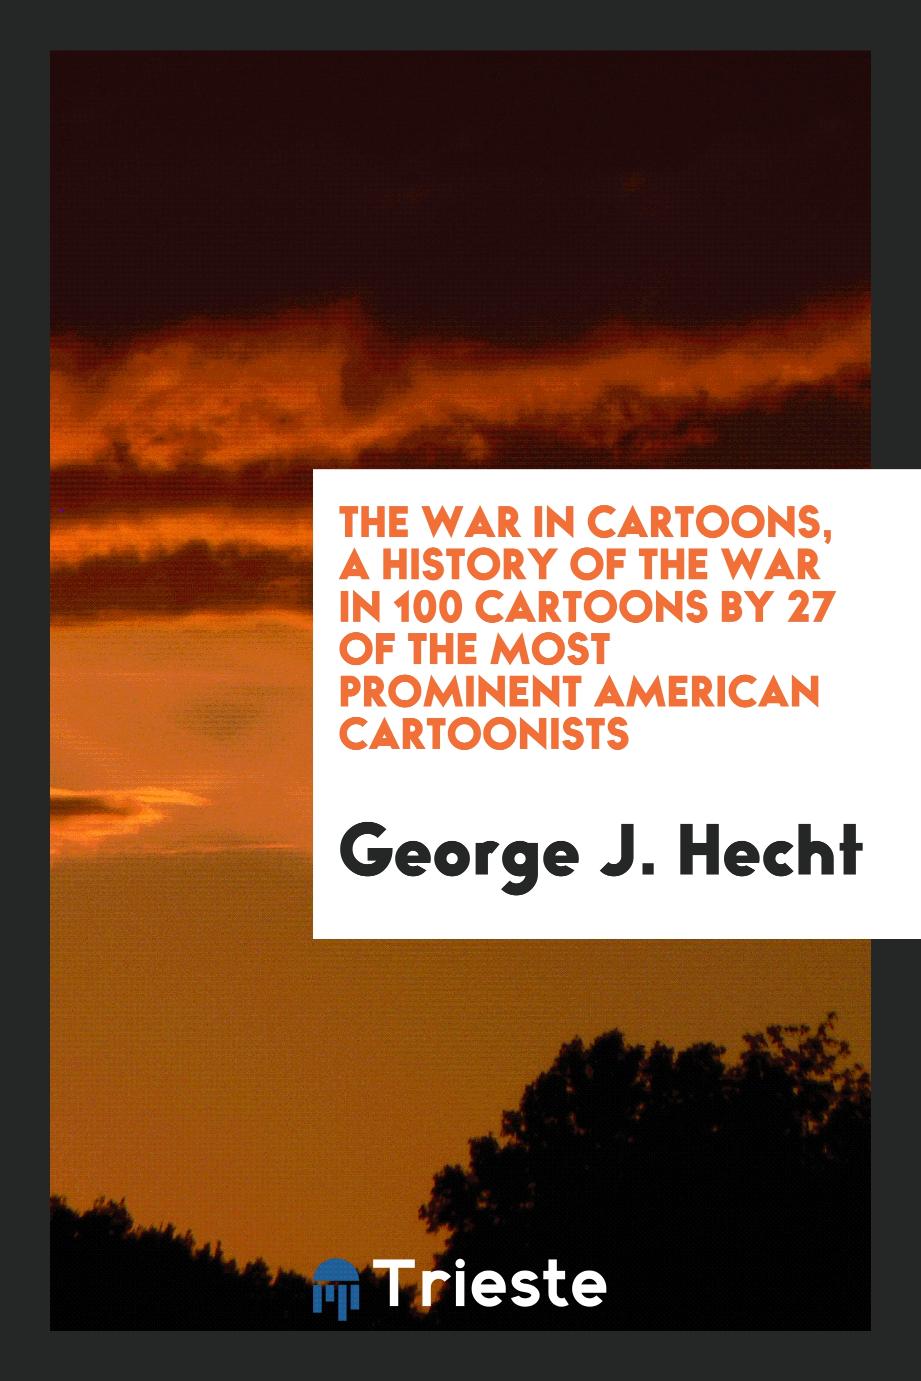 The War in Cartoons, a History of the War in 100 Cartoons by 27 of the Most Prominent American Cartoonists